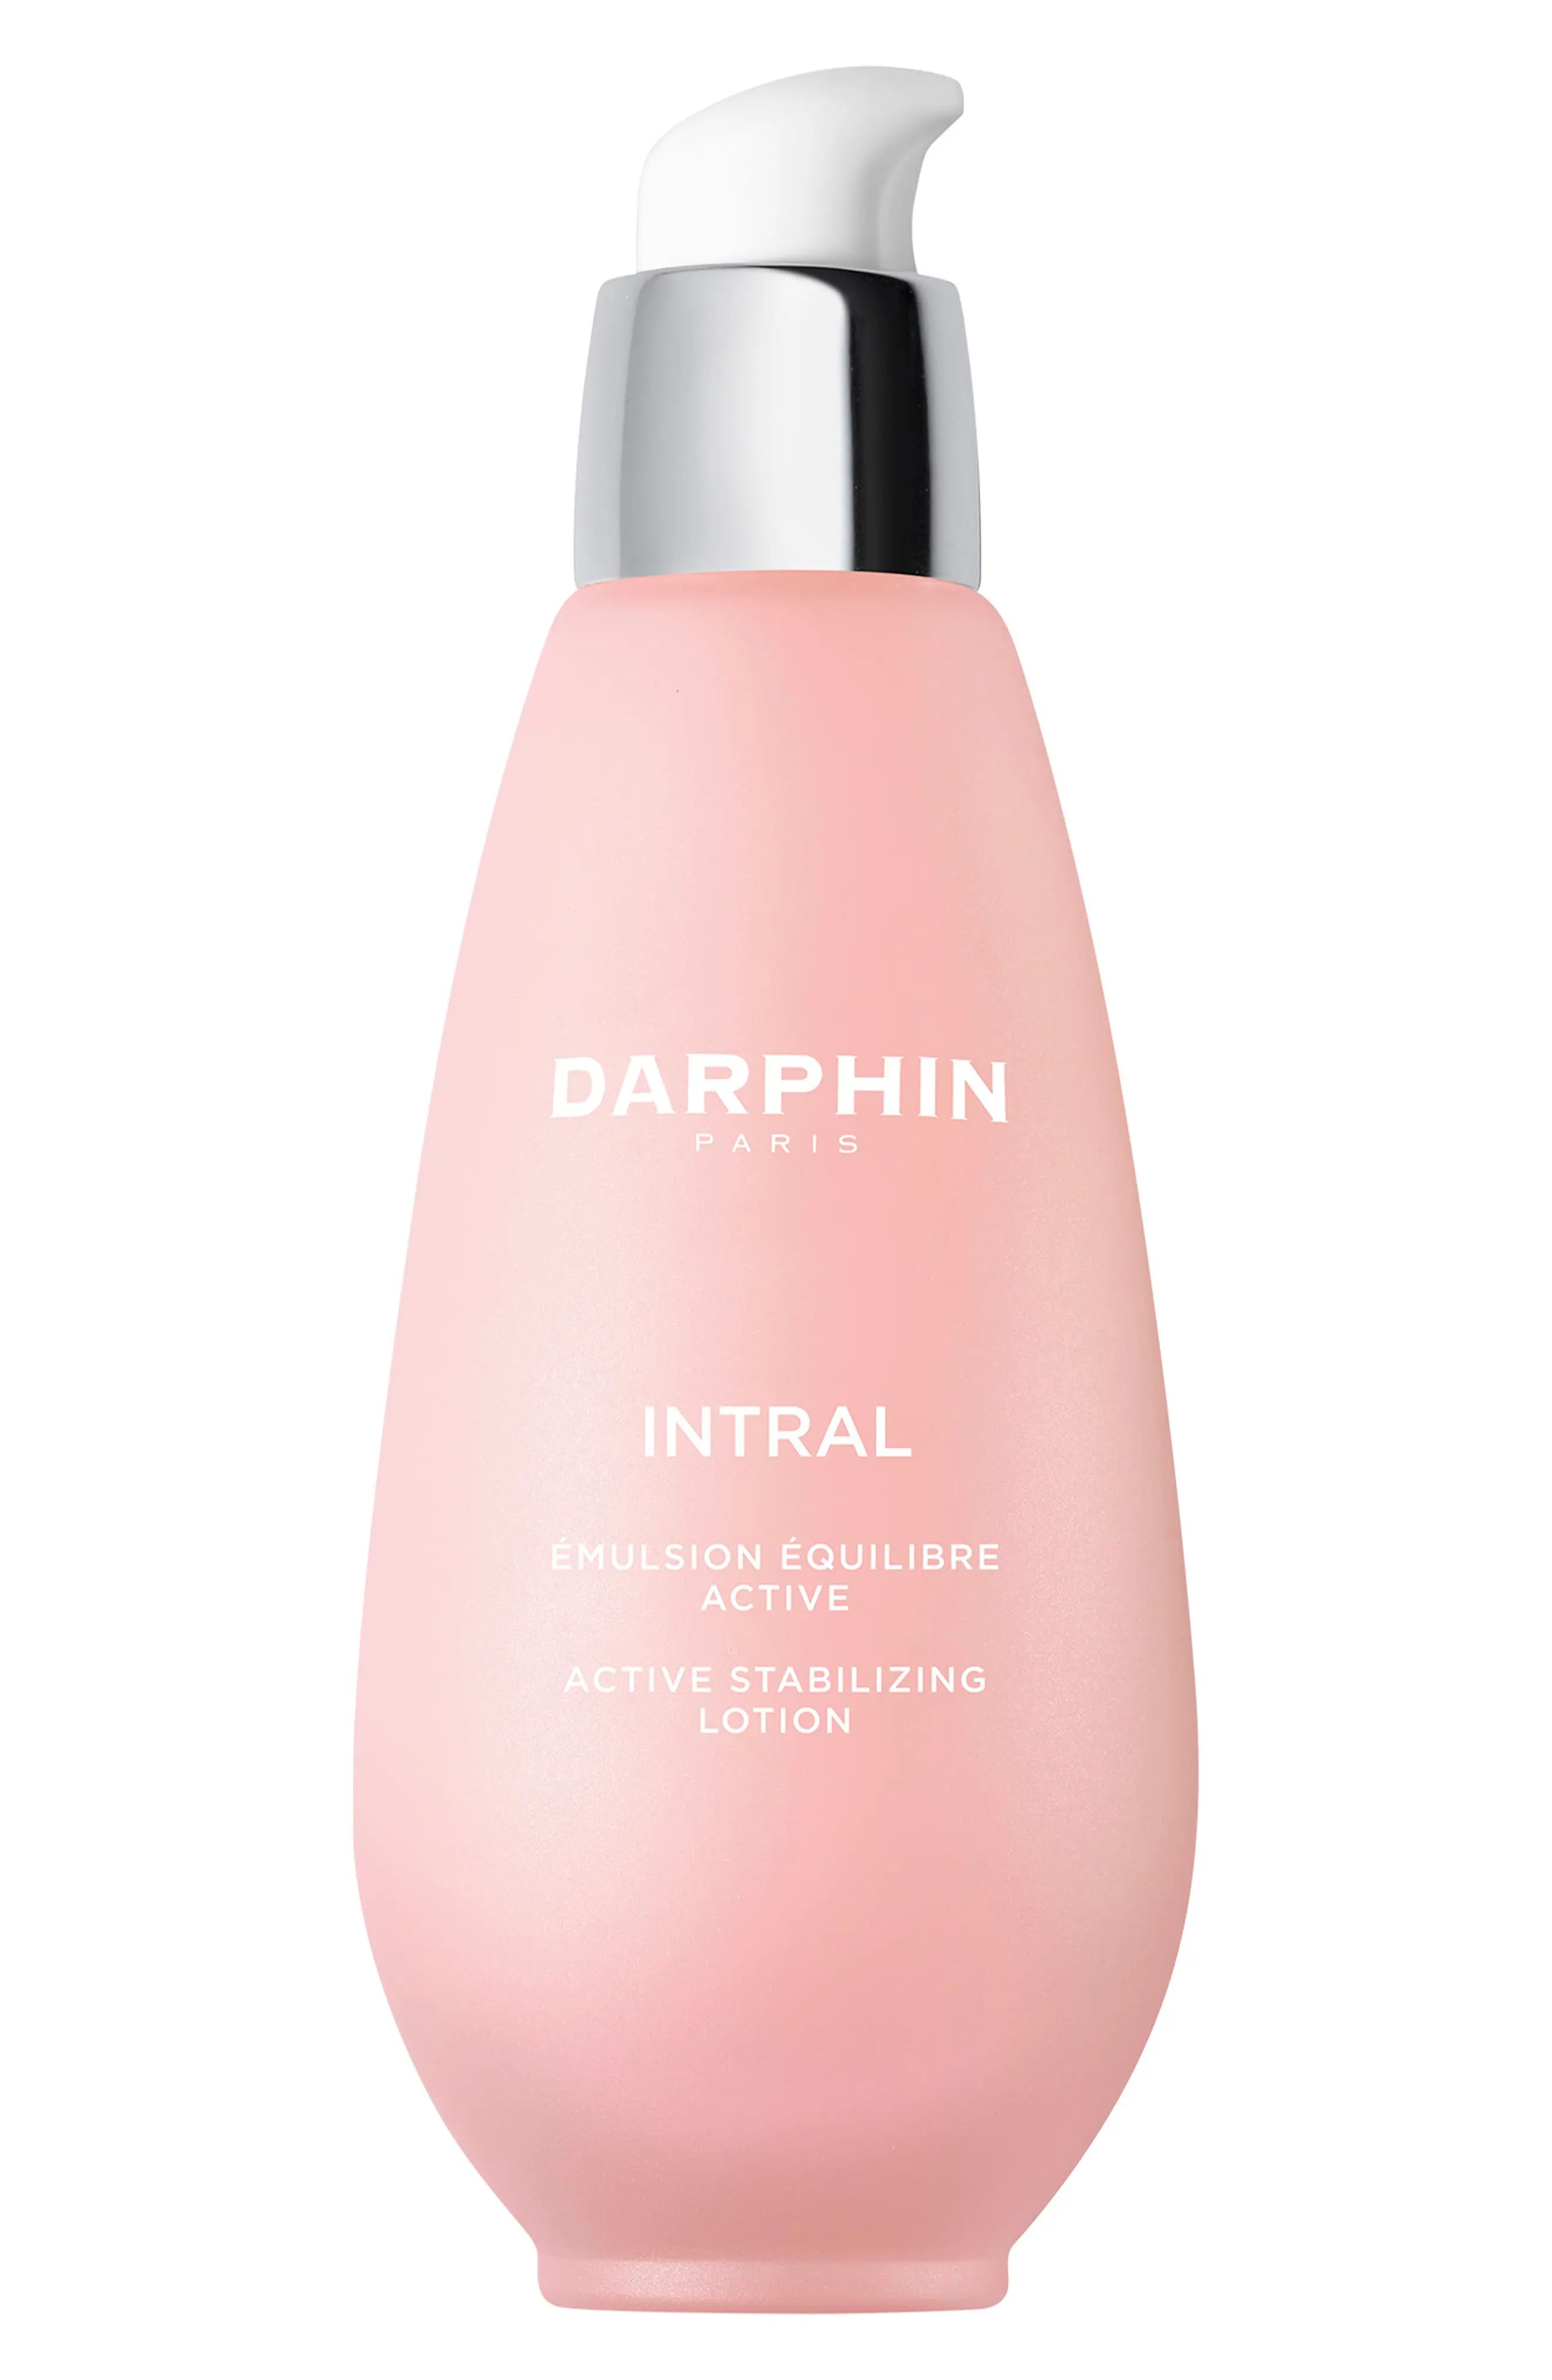 Darphin Intral Active Stabilizing Lotion Face Moisturizer at Nordstrom, Size 3.4 Oz | Nordstrom